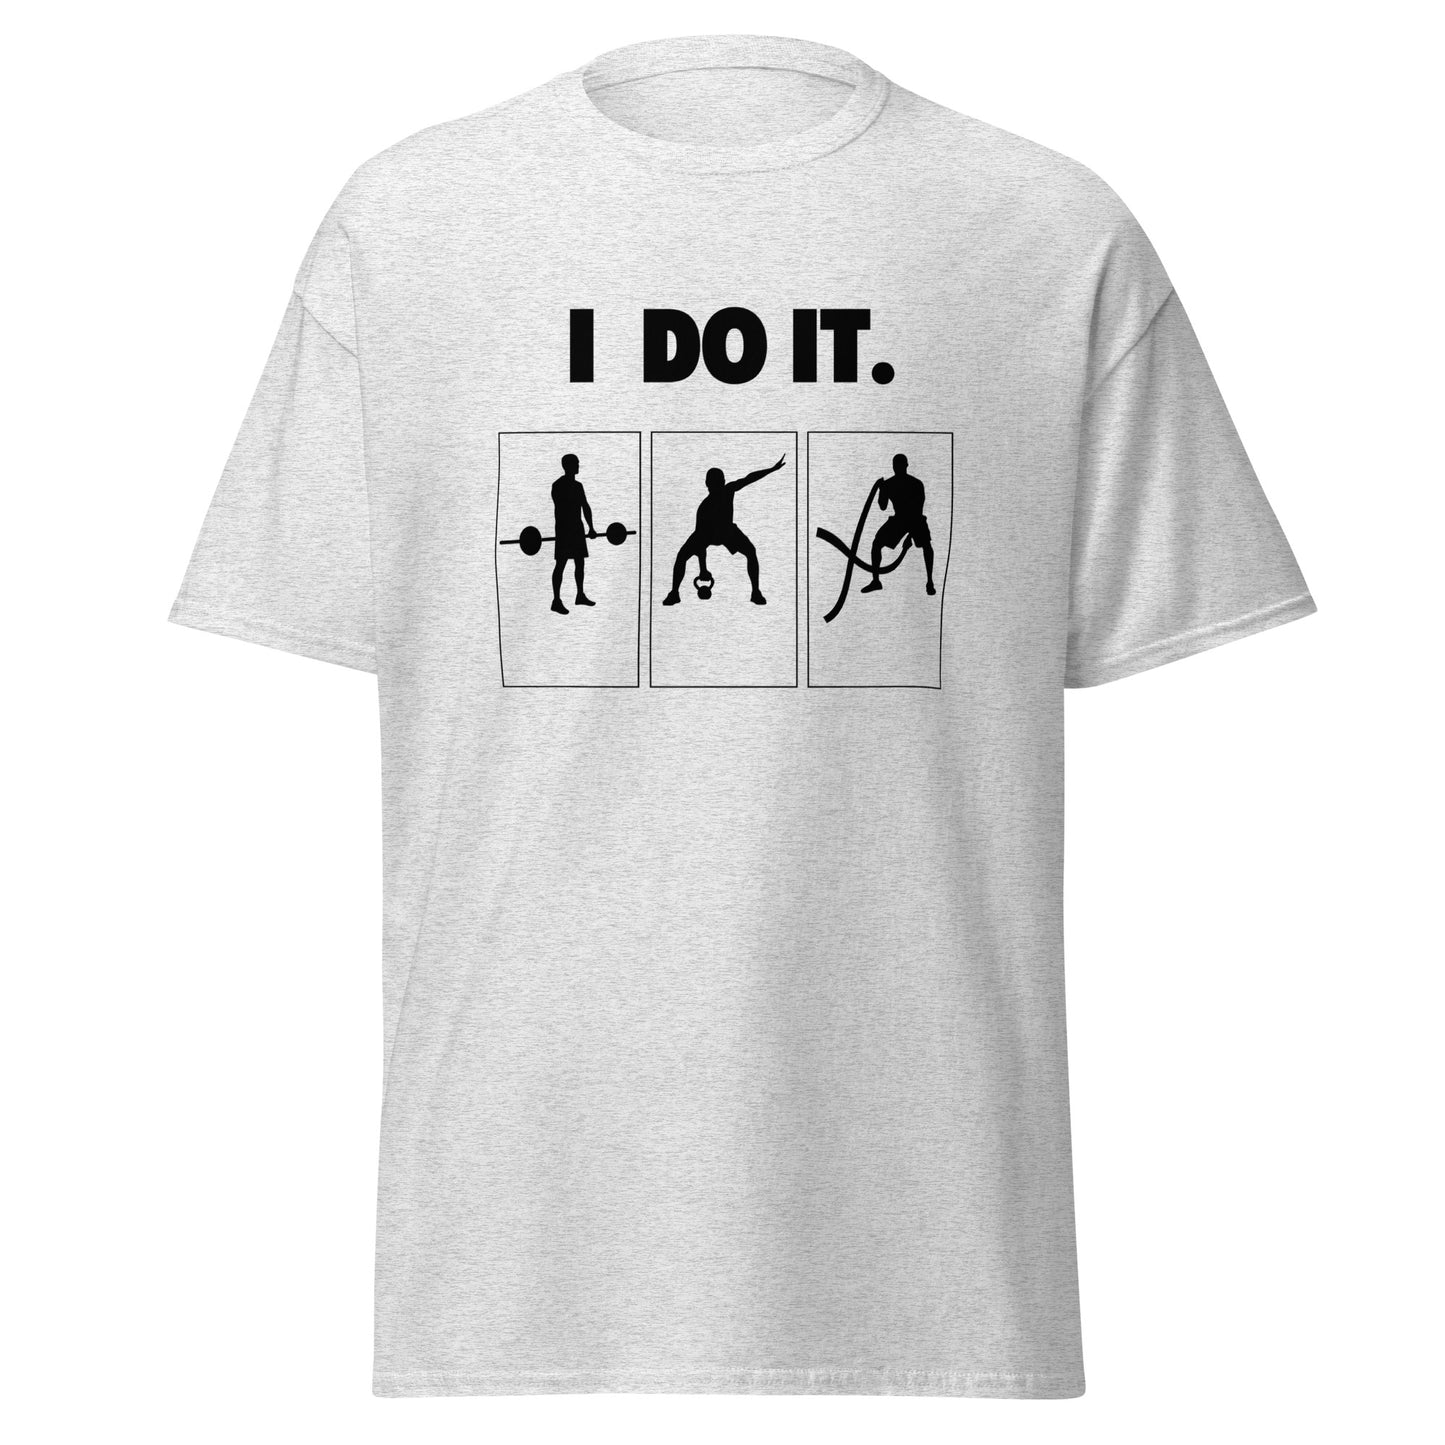 I DO IT. Men's Workout classic tee